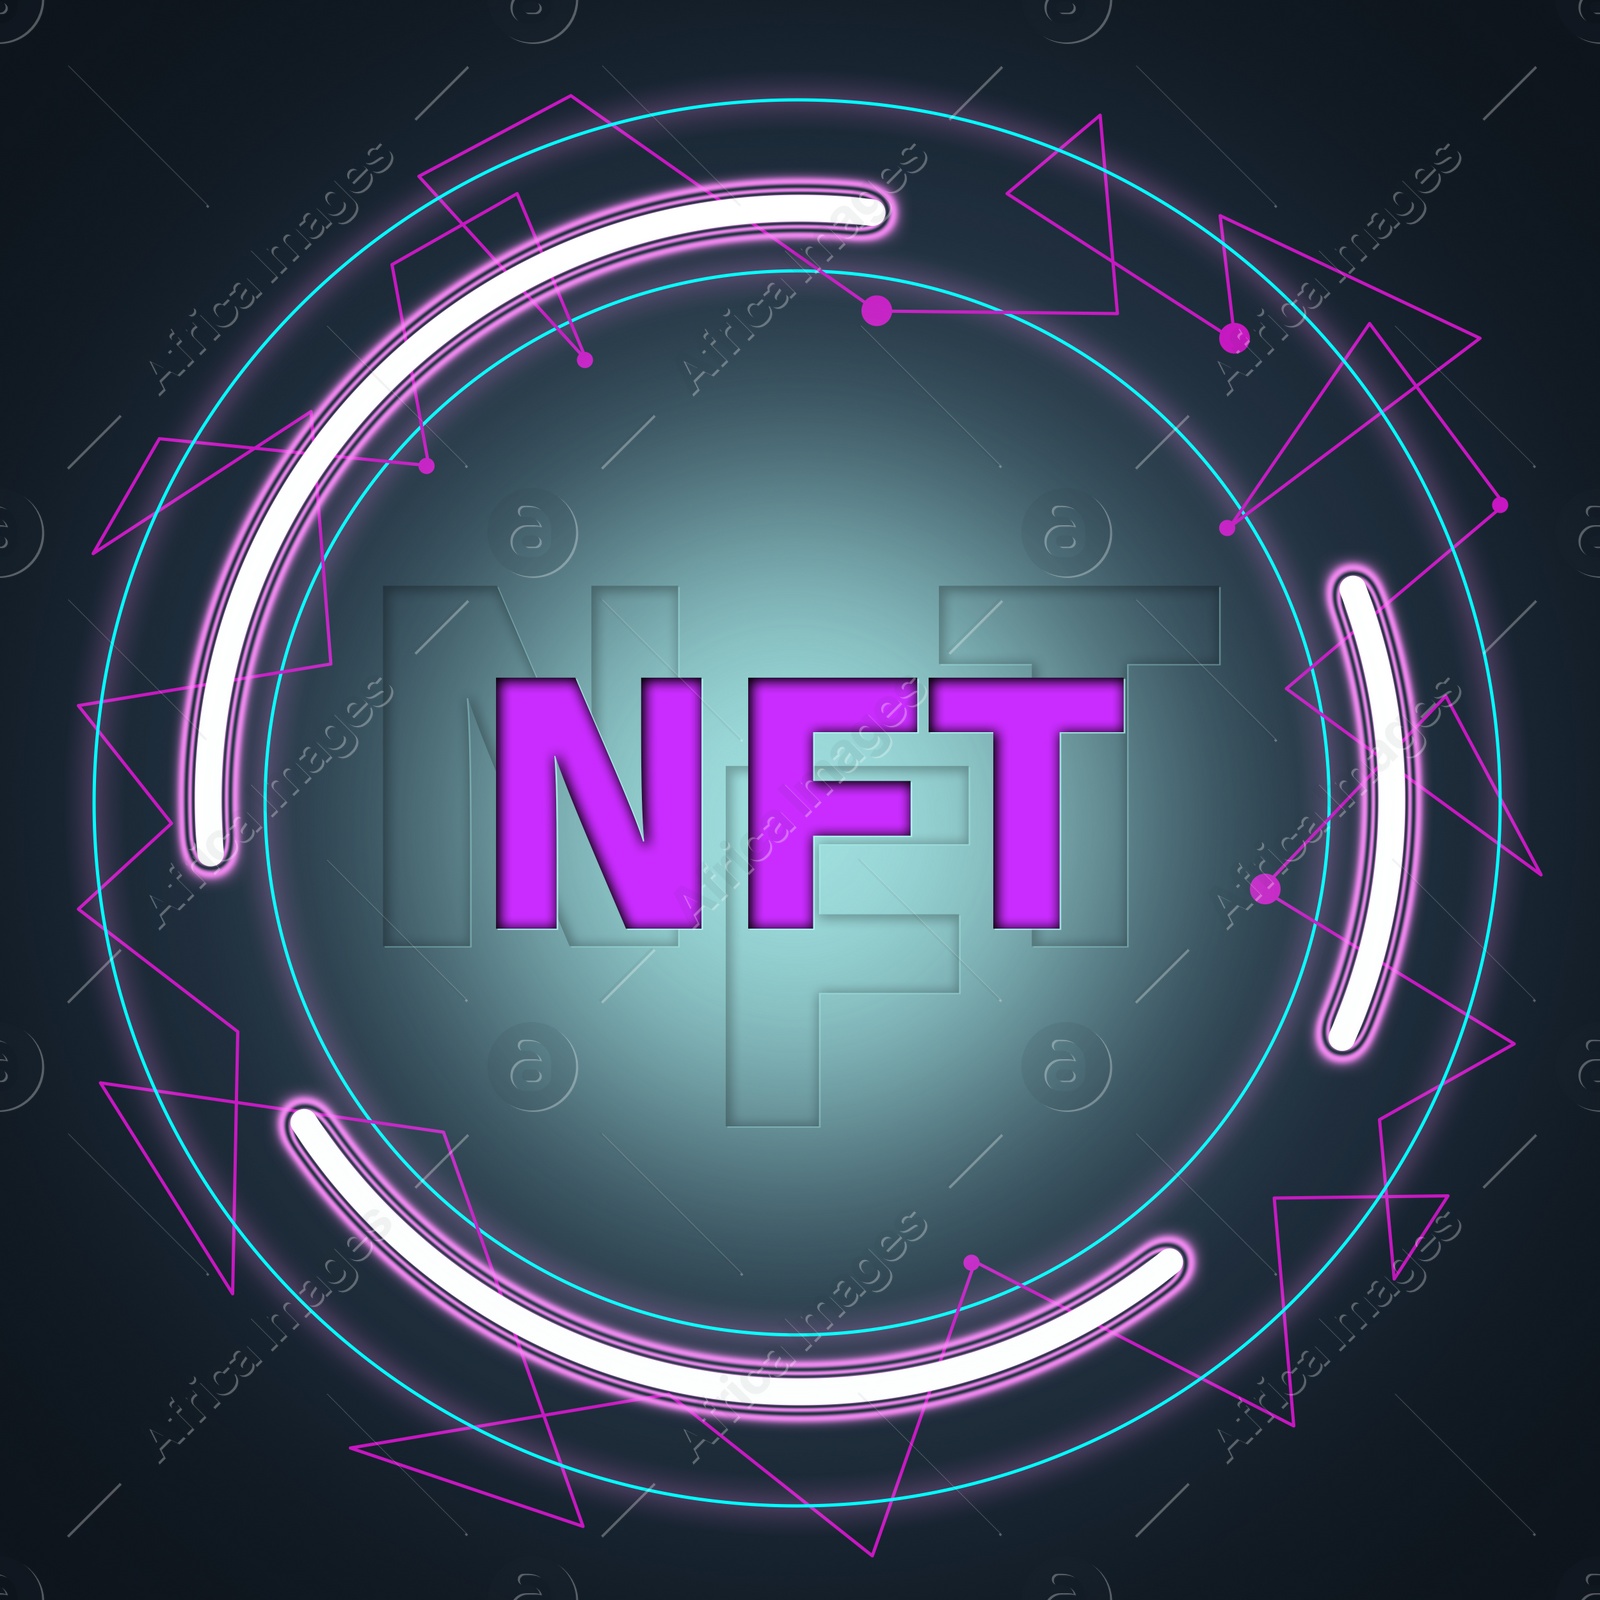 Illustration of Abbreviation NFT (non-fungible token) and circuit board pattern illustration